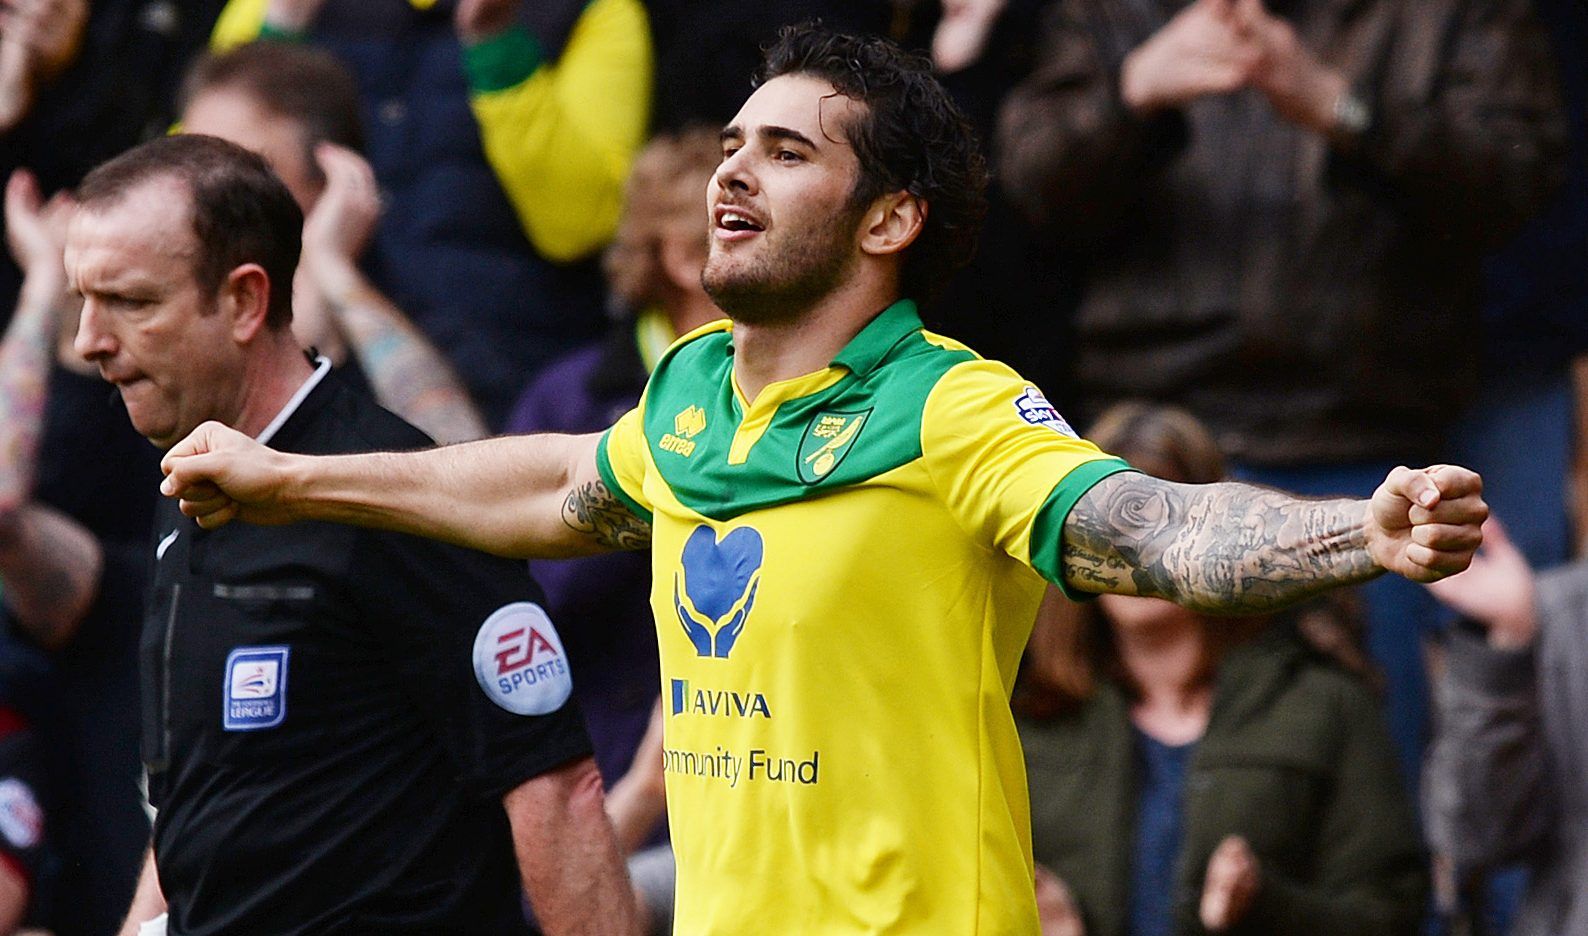 johnson-premier-league-norwich-leeds-bates-grayson-championshipBradley Johnson celebrates after scoring the second goal for Norwich 
Mandatory Credit: Action Images / Alan Walter 
Livepic 
EDITORIAL USE ONLY. No use with unauthorized audio, video, data, fixture lists, club/league logos or 